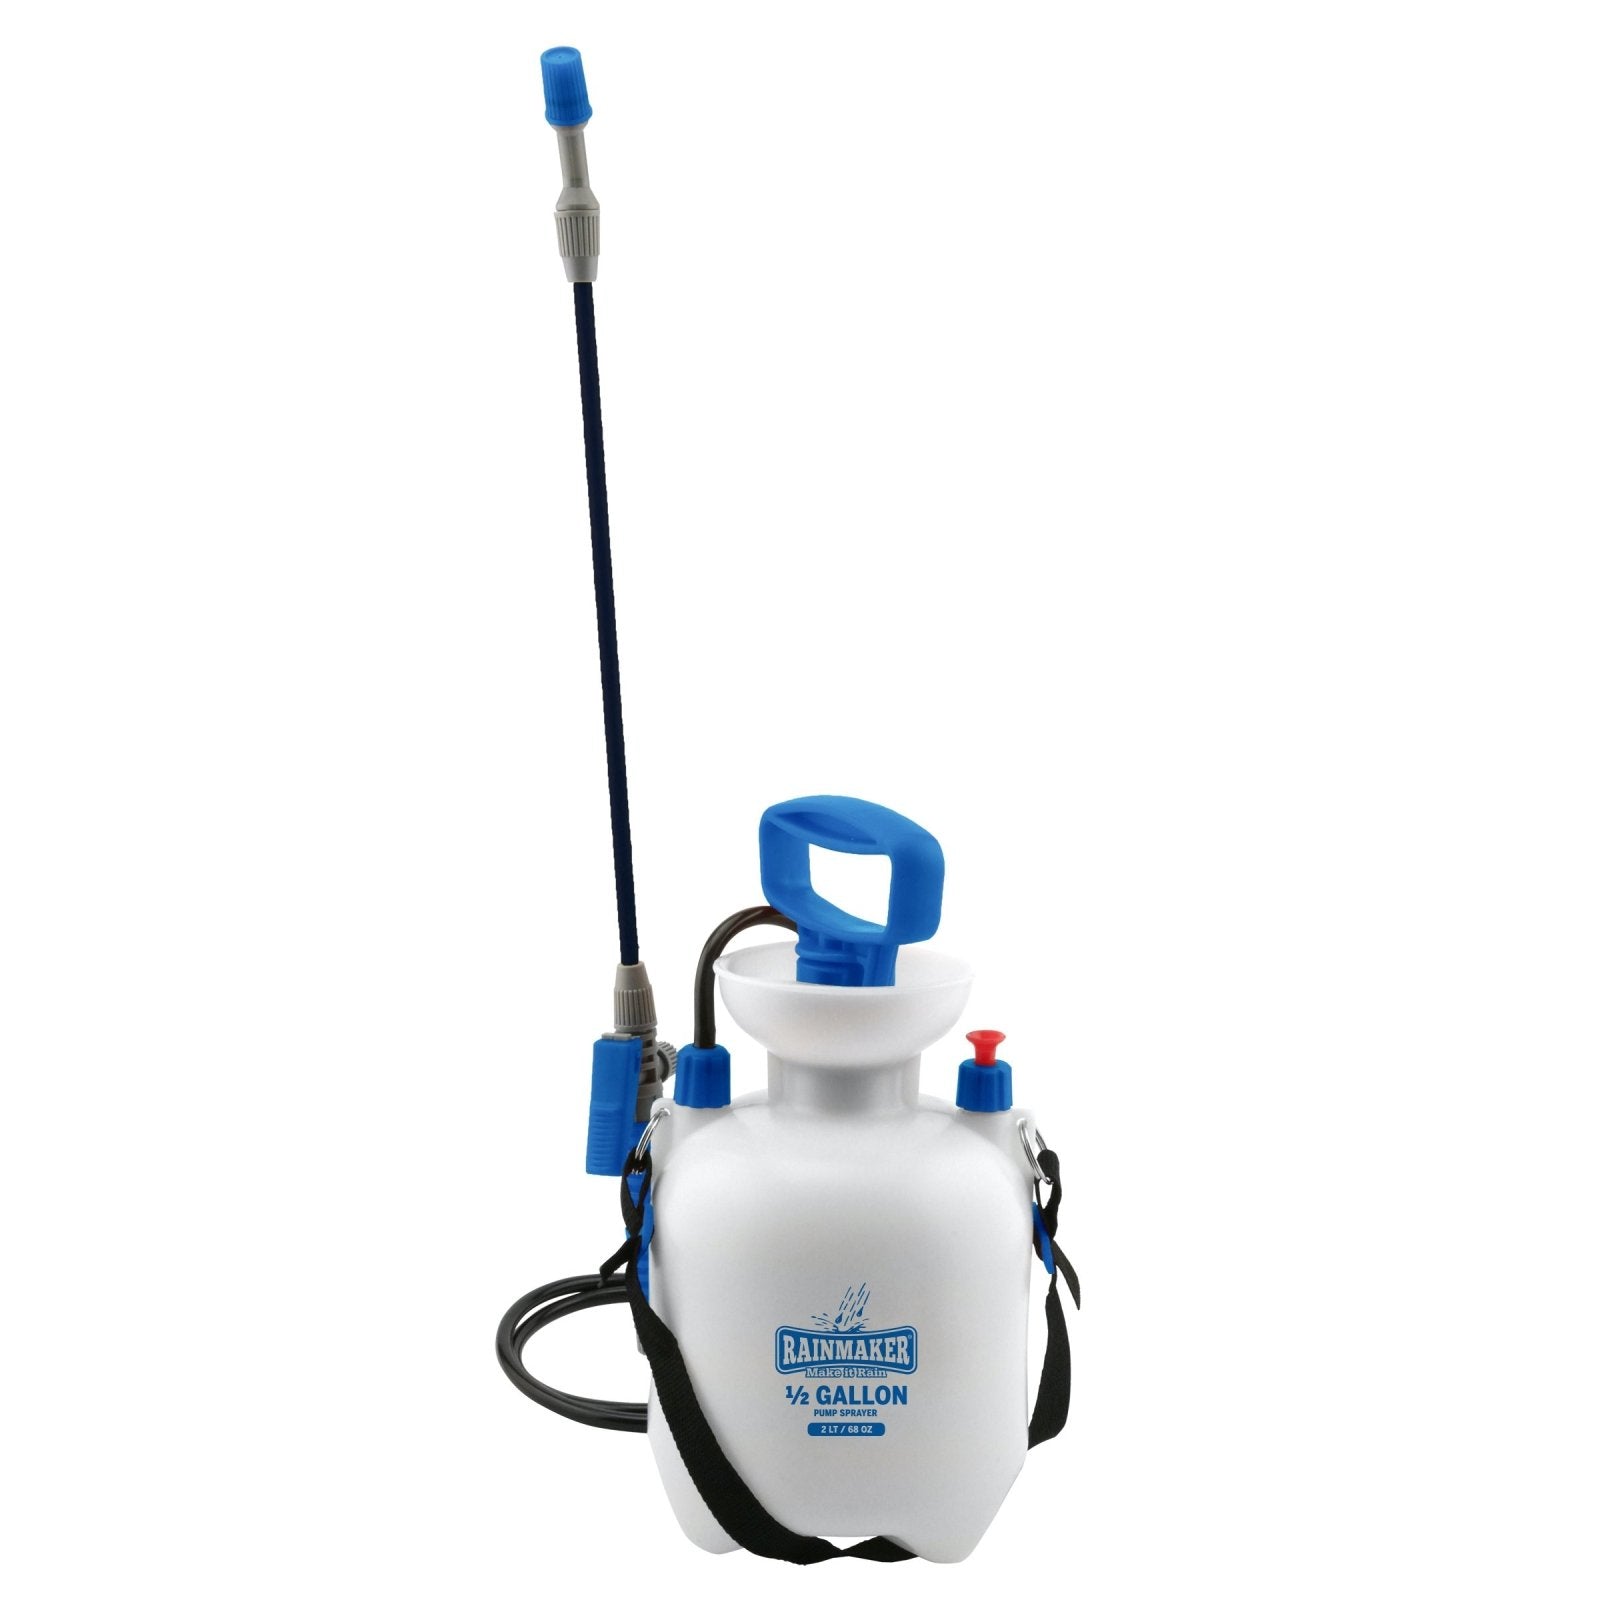 Harris Professional Spray Bottle 32 oz, All Purpose Trigger Sprayer with  Adjustable Nozzle and Measurements